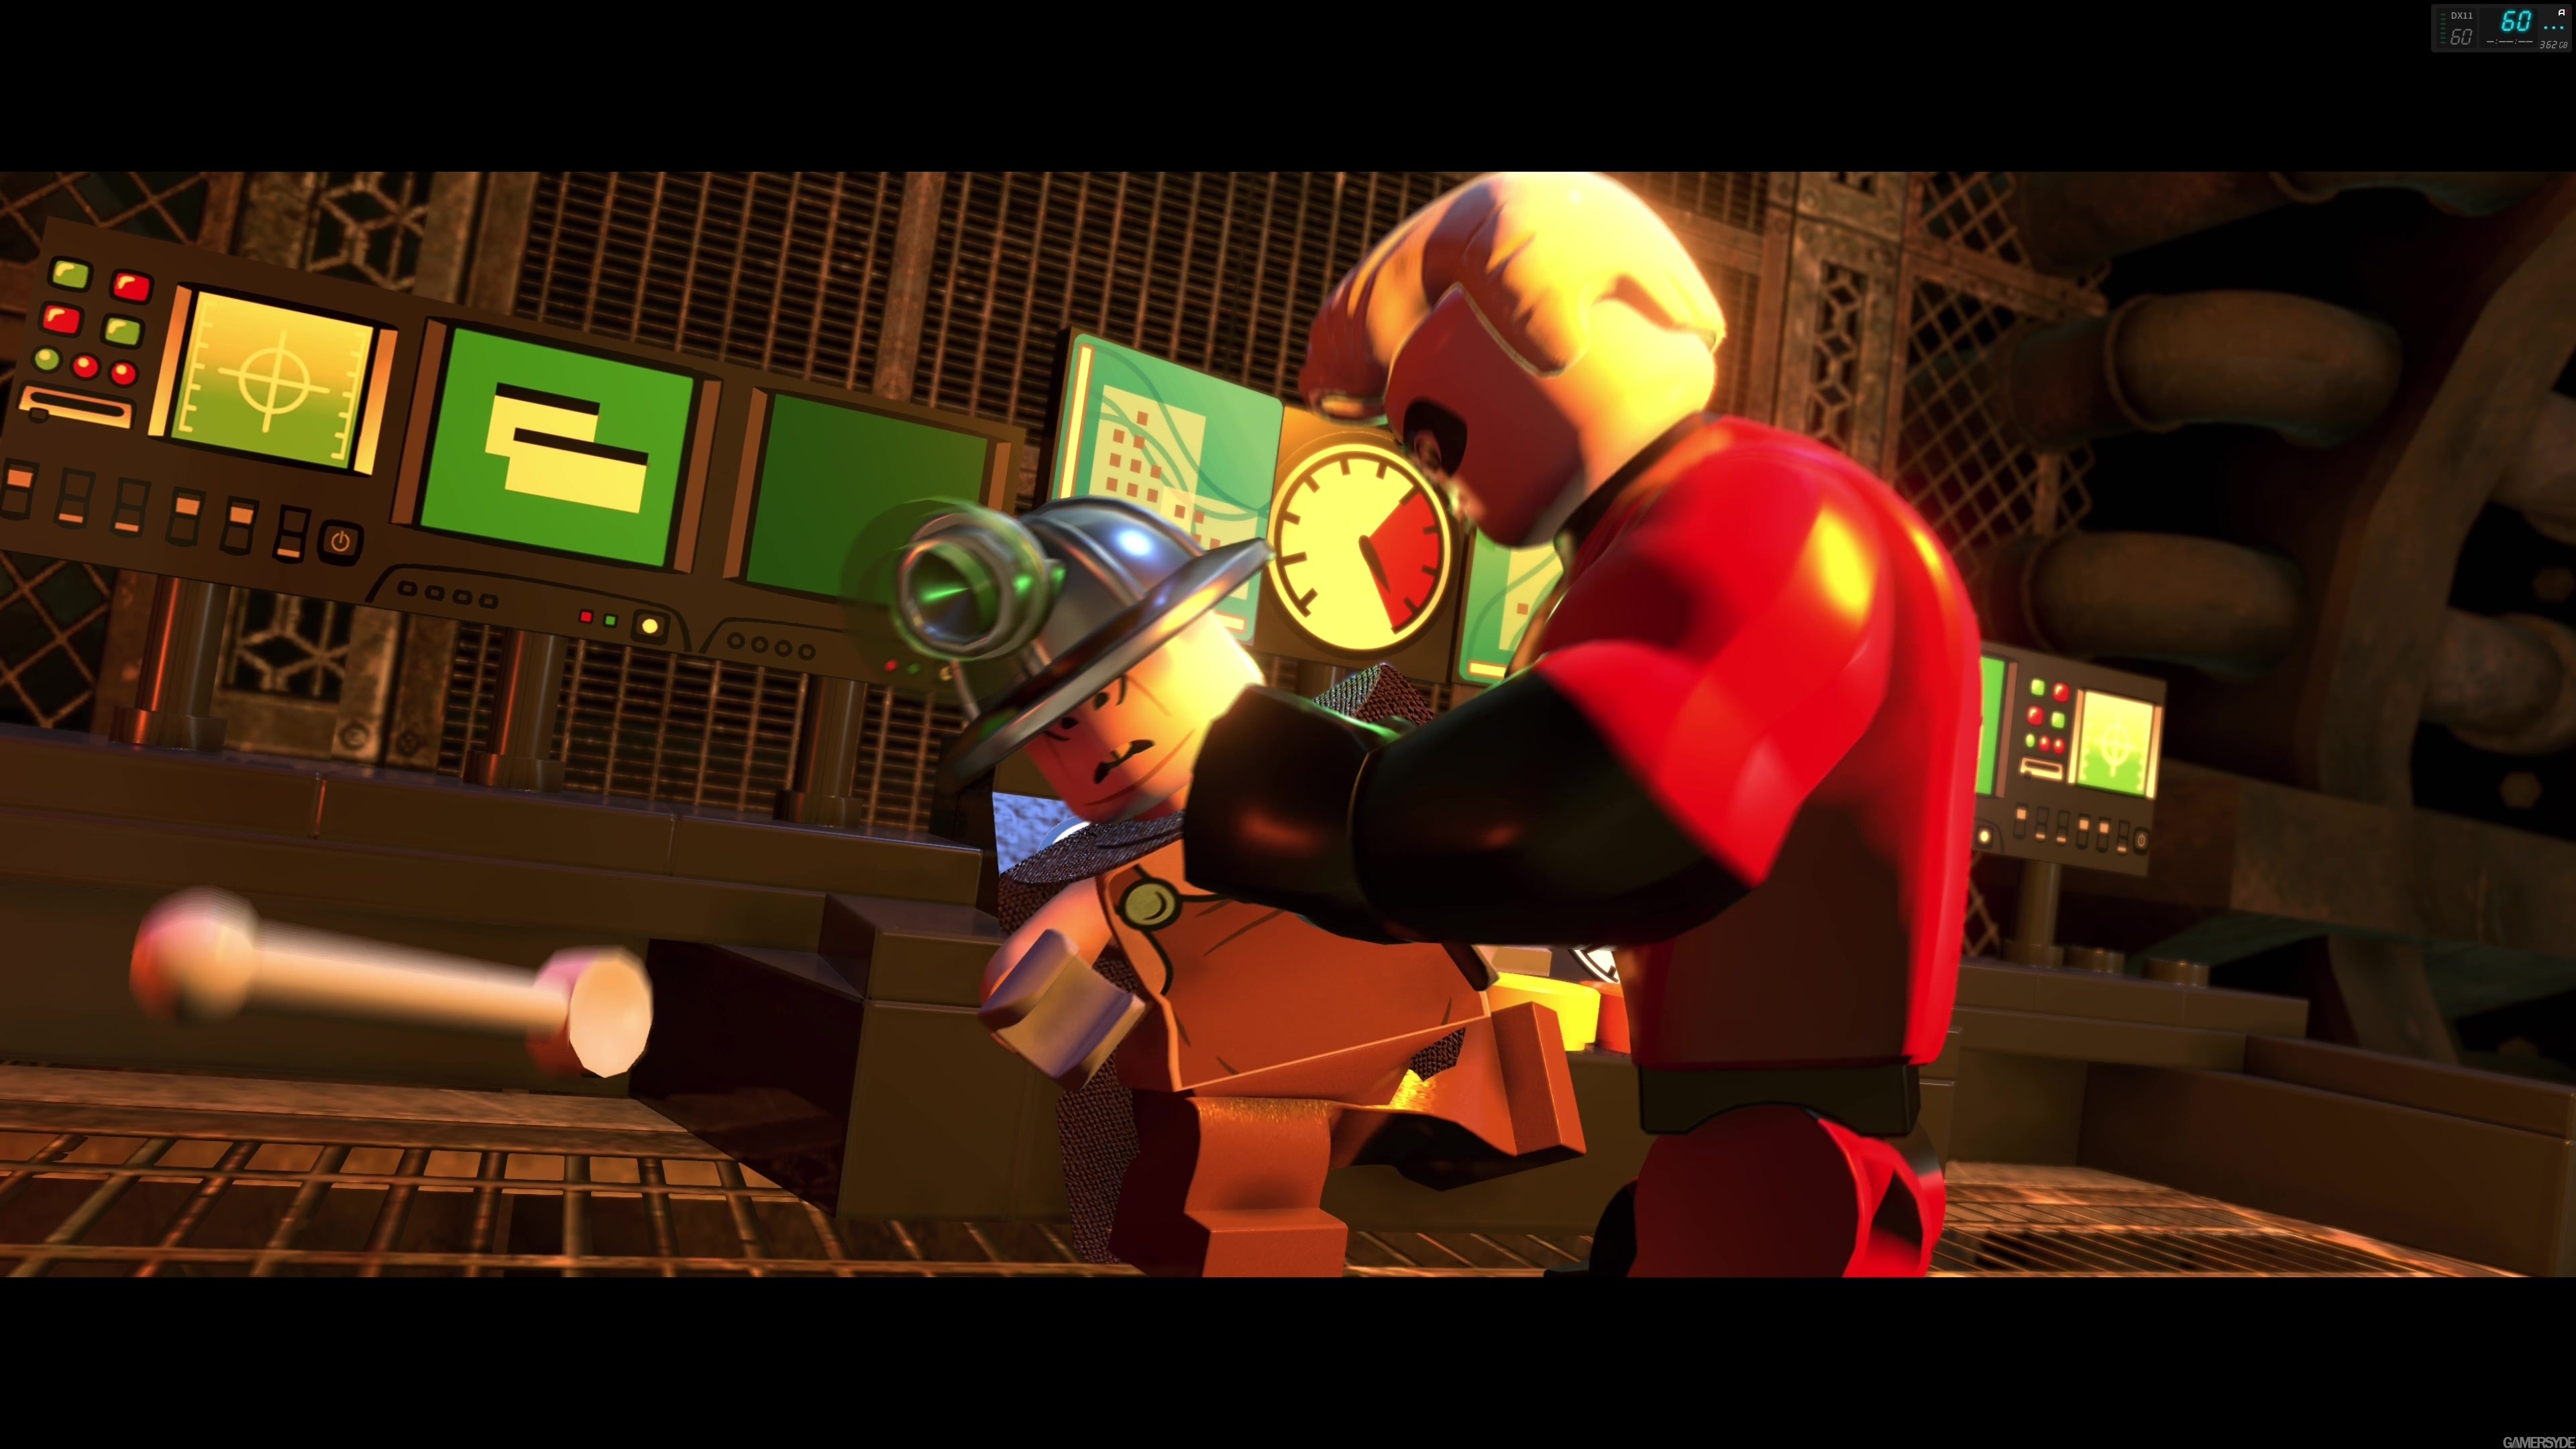 lego the incredibles game of torrent